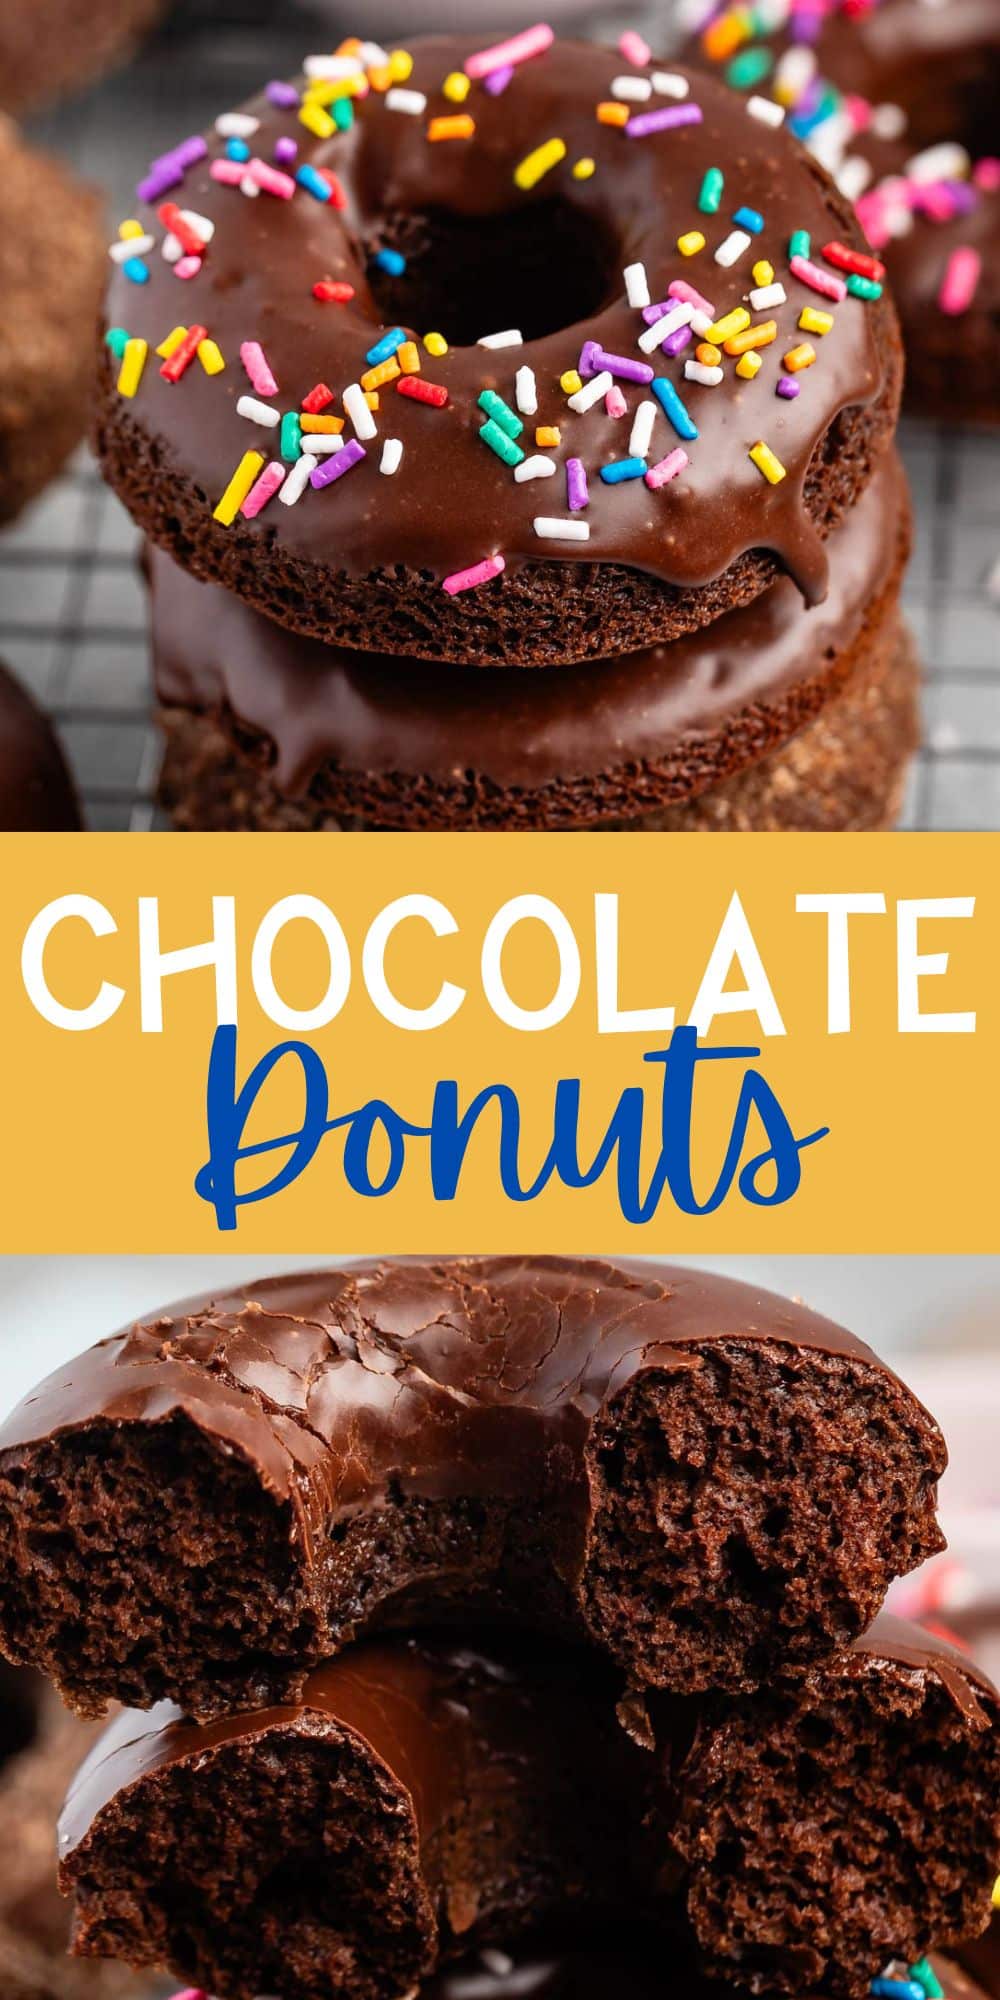 two photos of stacked chocolate donuts with chocolate glaze and colorful sprinkles on top with words on the image.